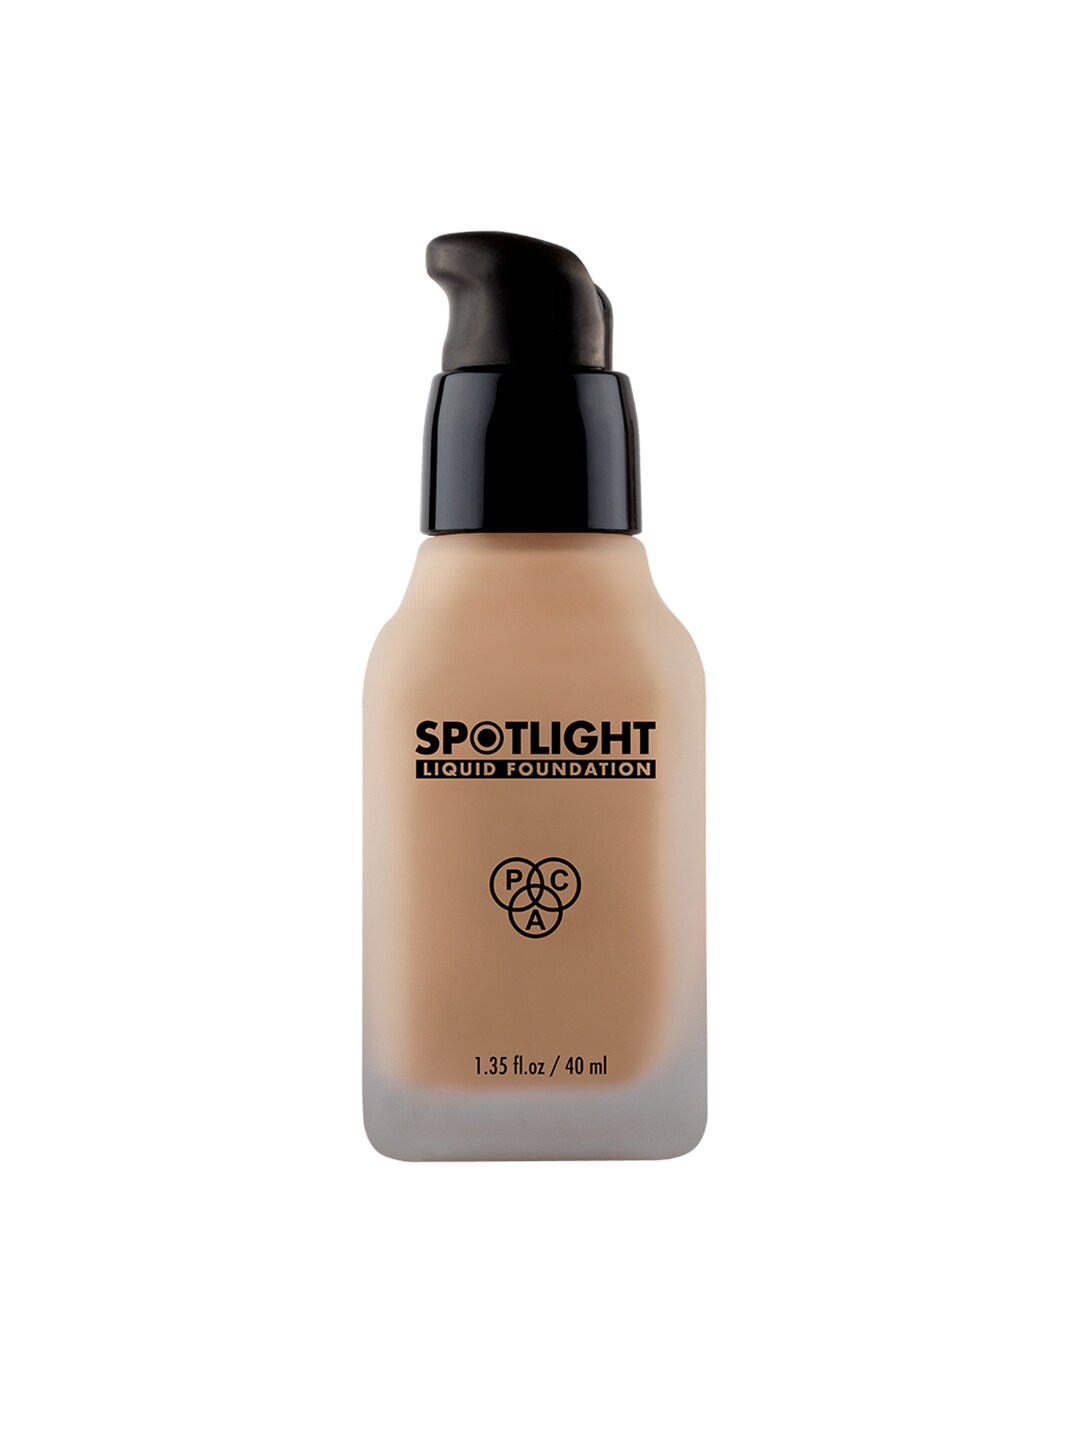 PAC Spotlight Waterproof Liquid Foundation with Hyaluronic Acid 40ml - Oxford Stone Price in India